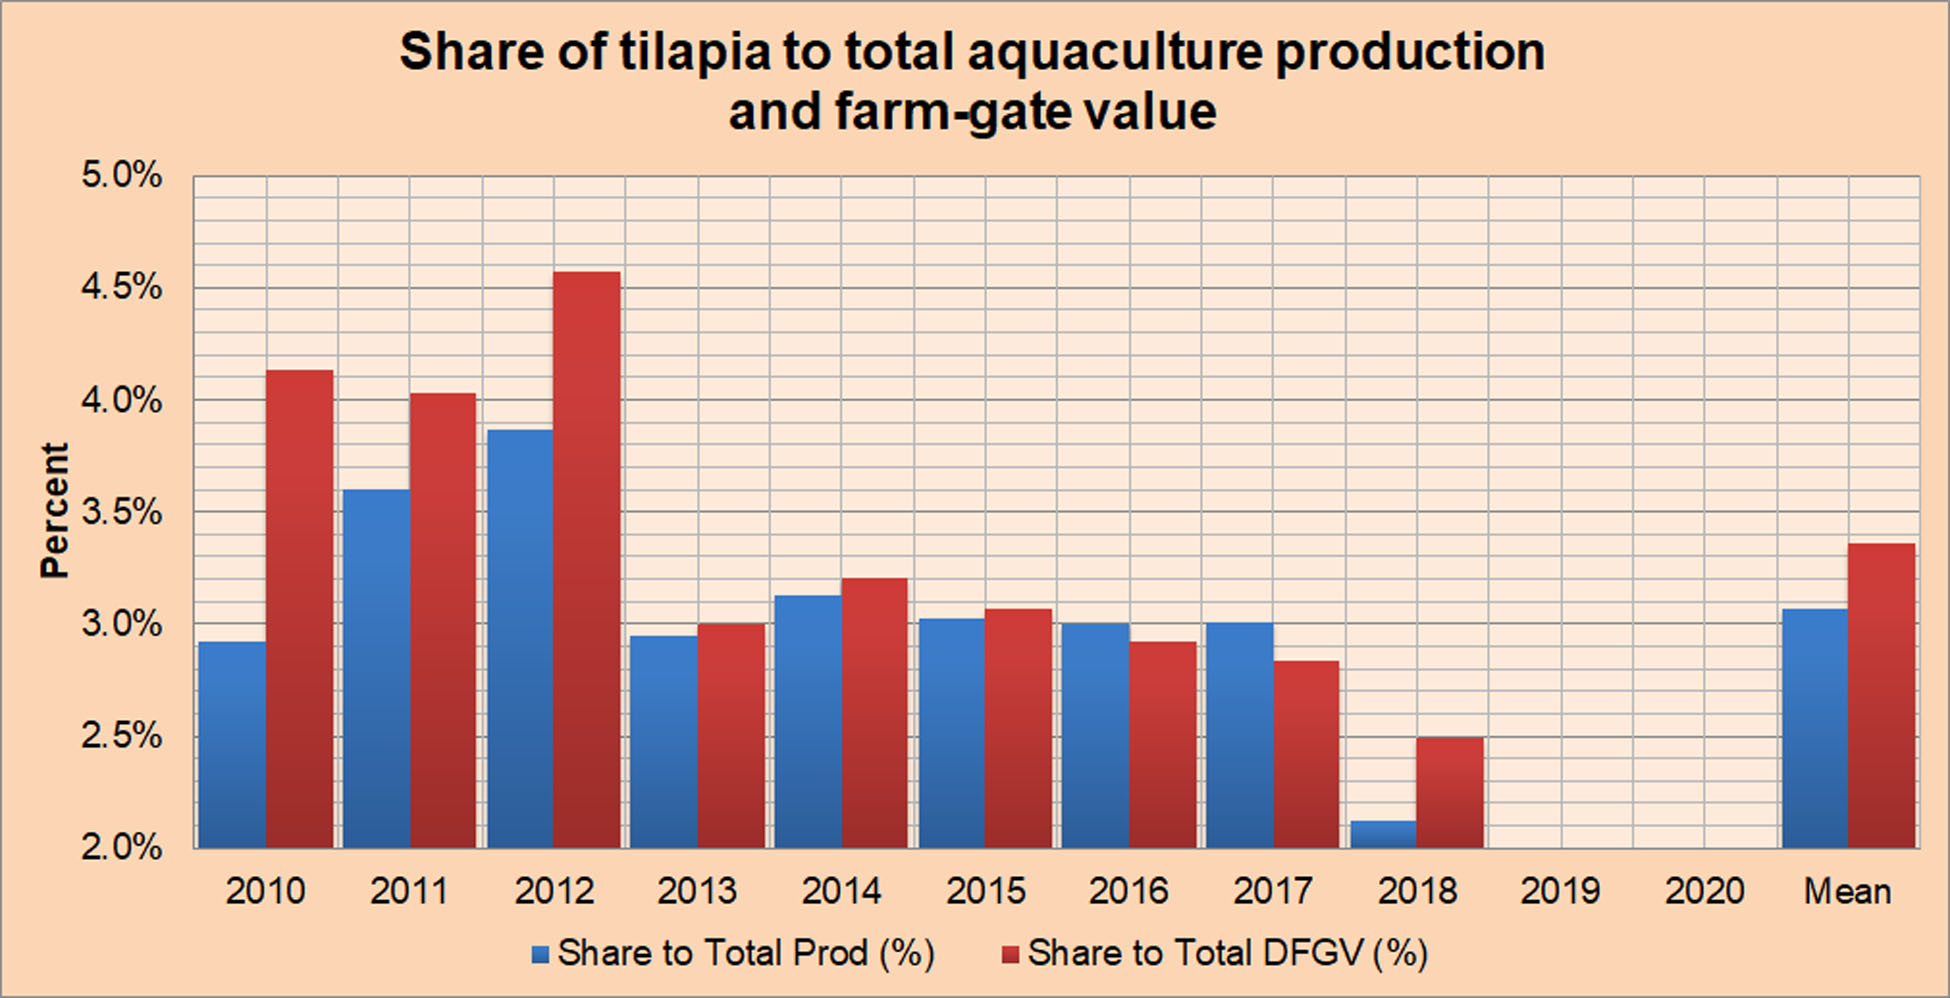 Share of Tilapia to Total Aquaculture Production